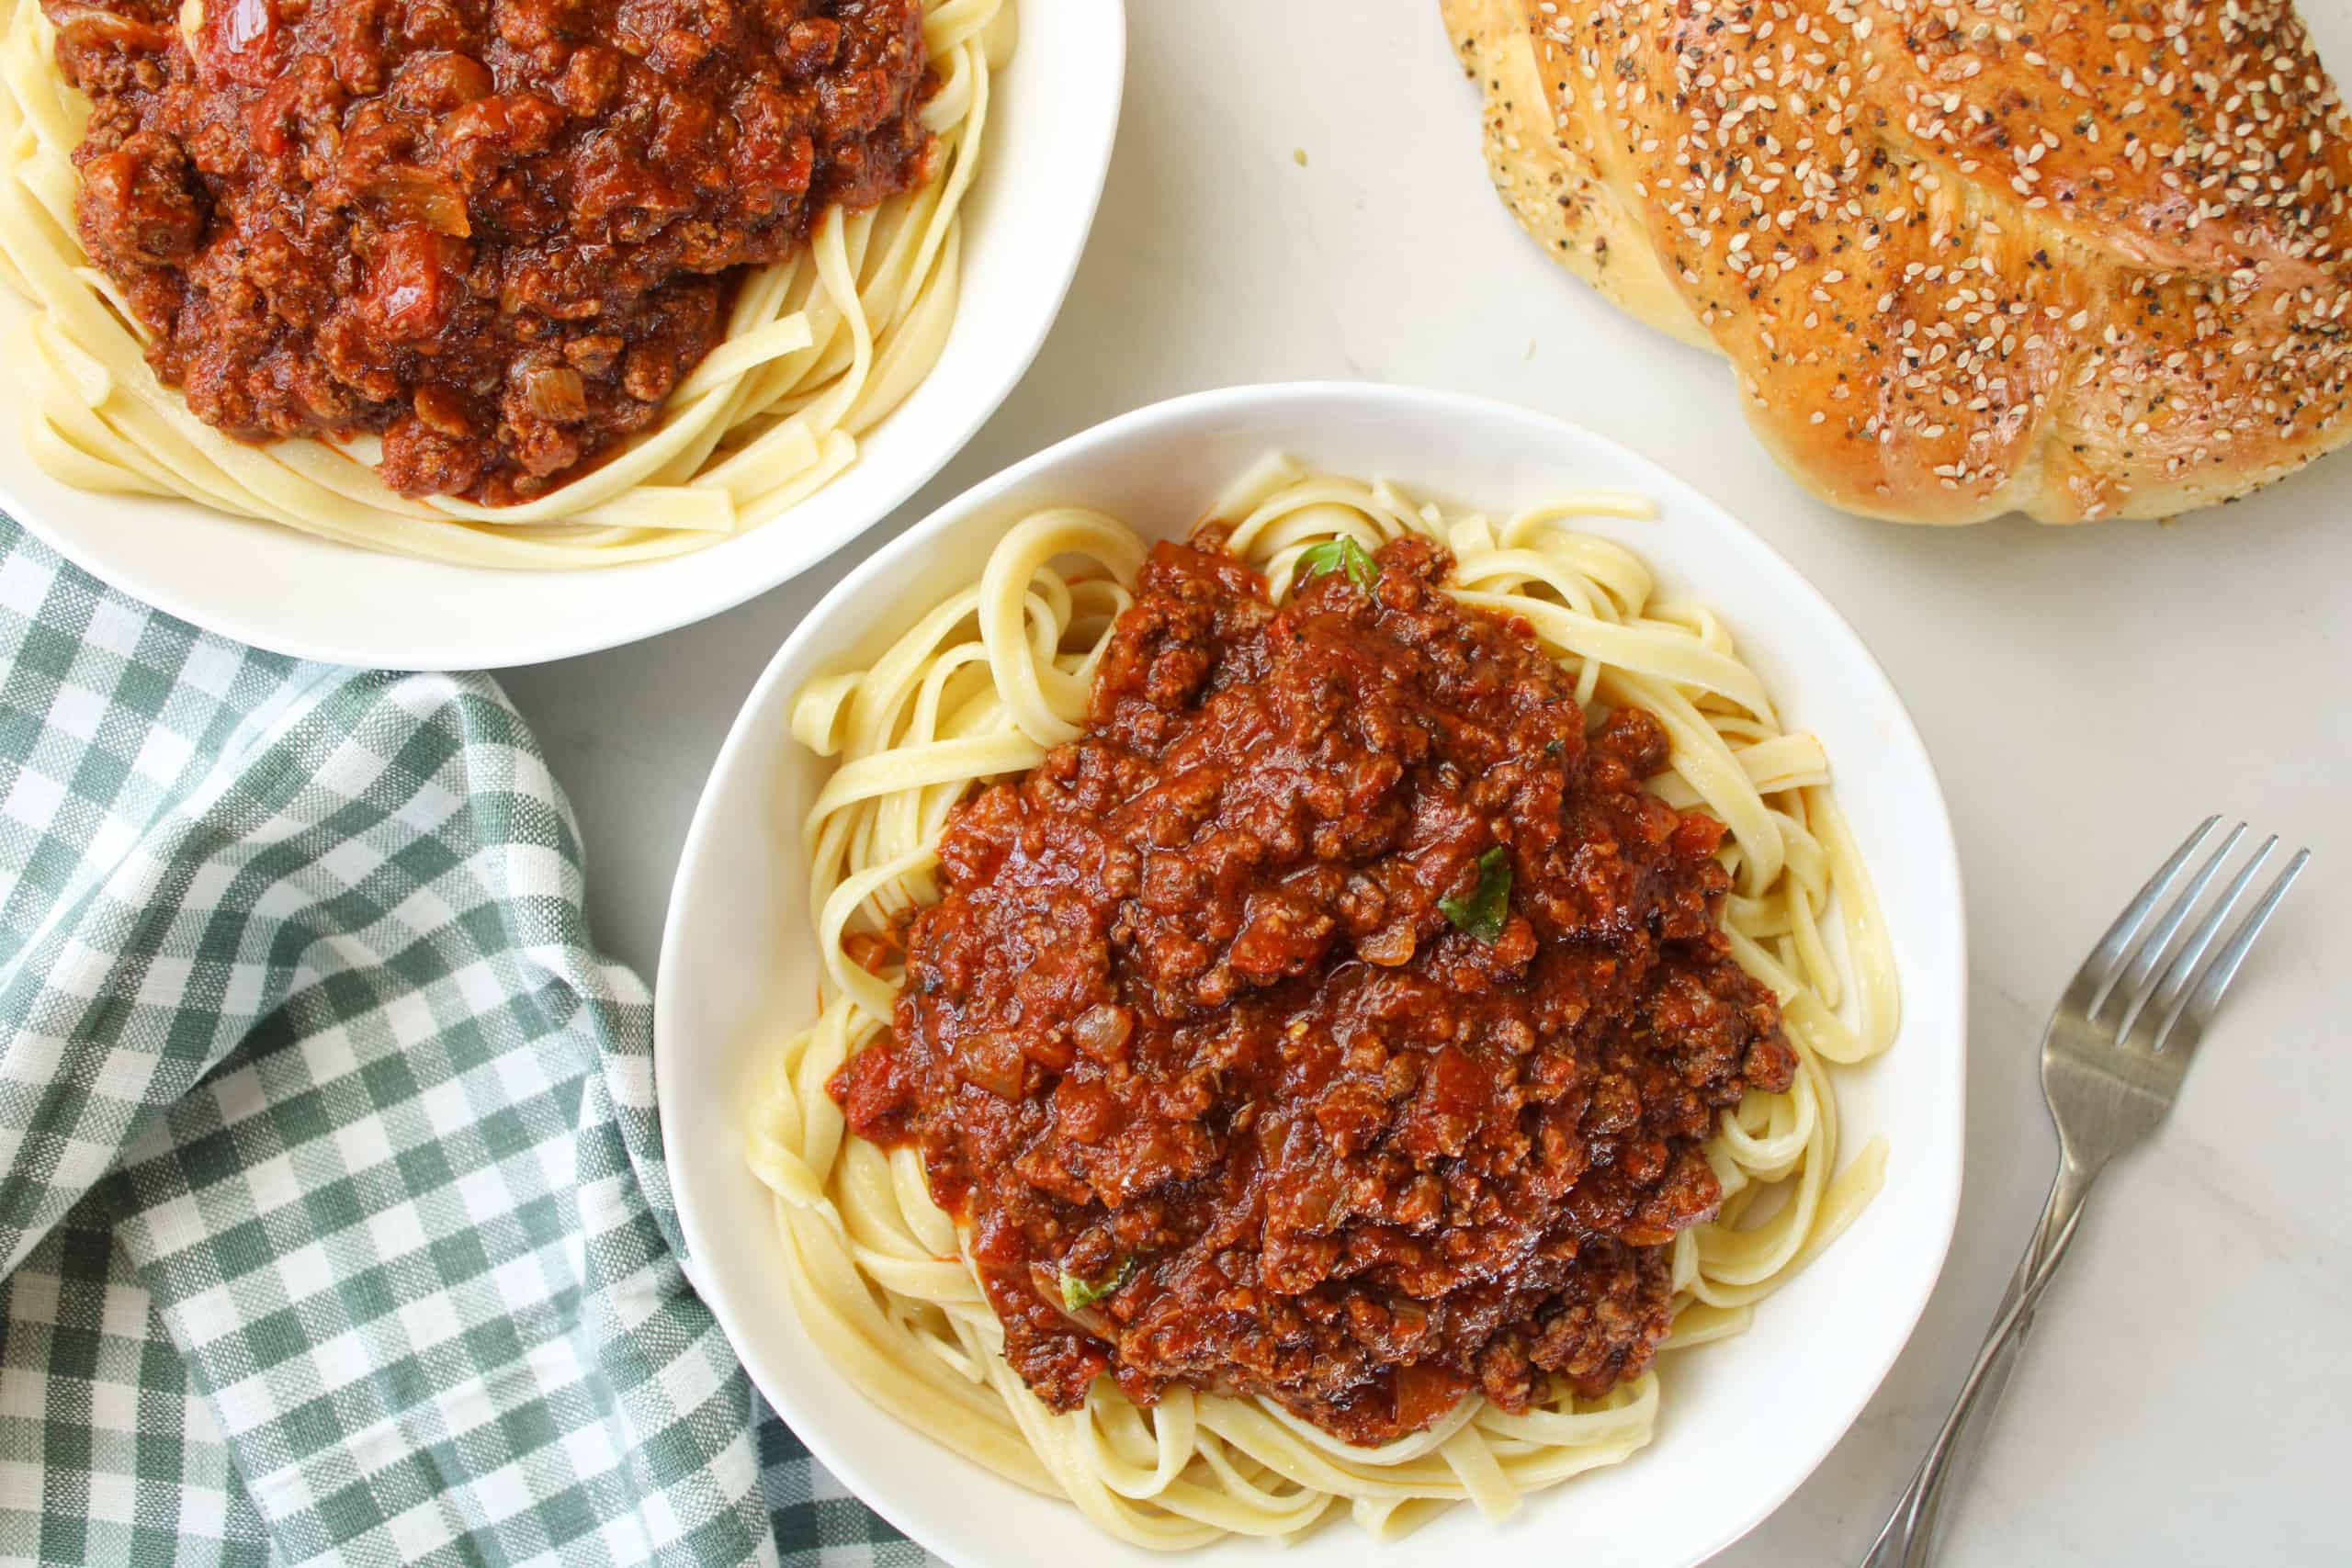 Bison meat sauce over pasta in a bowl on a table with bread.